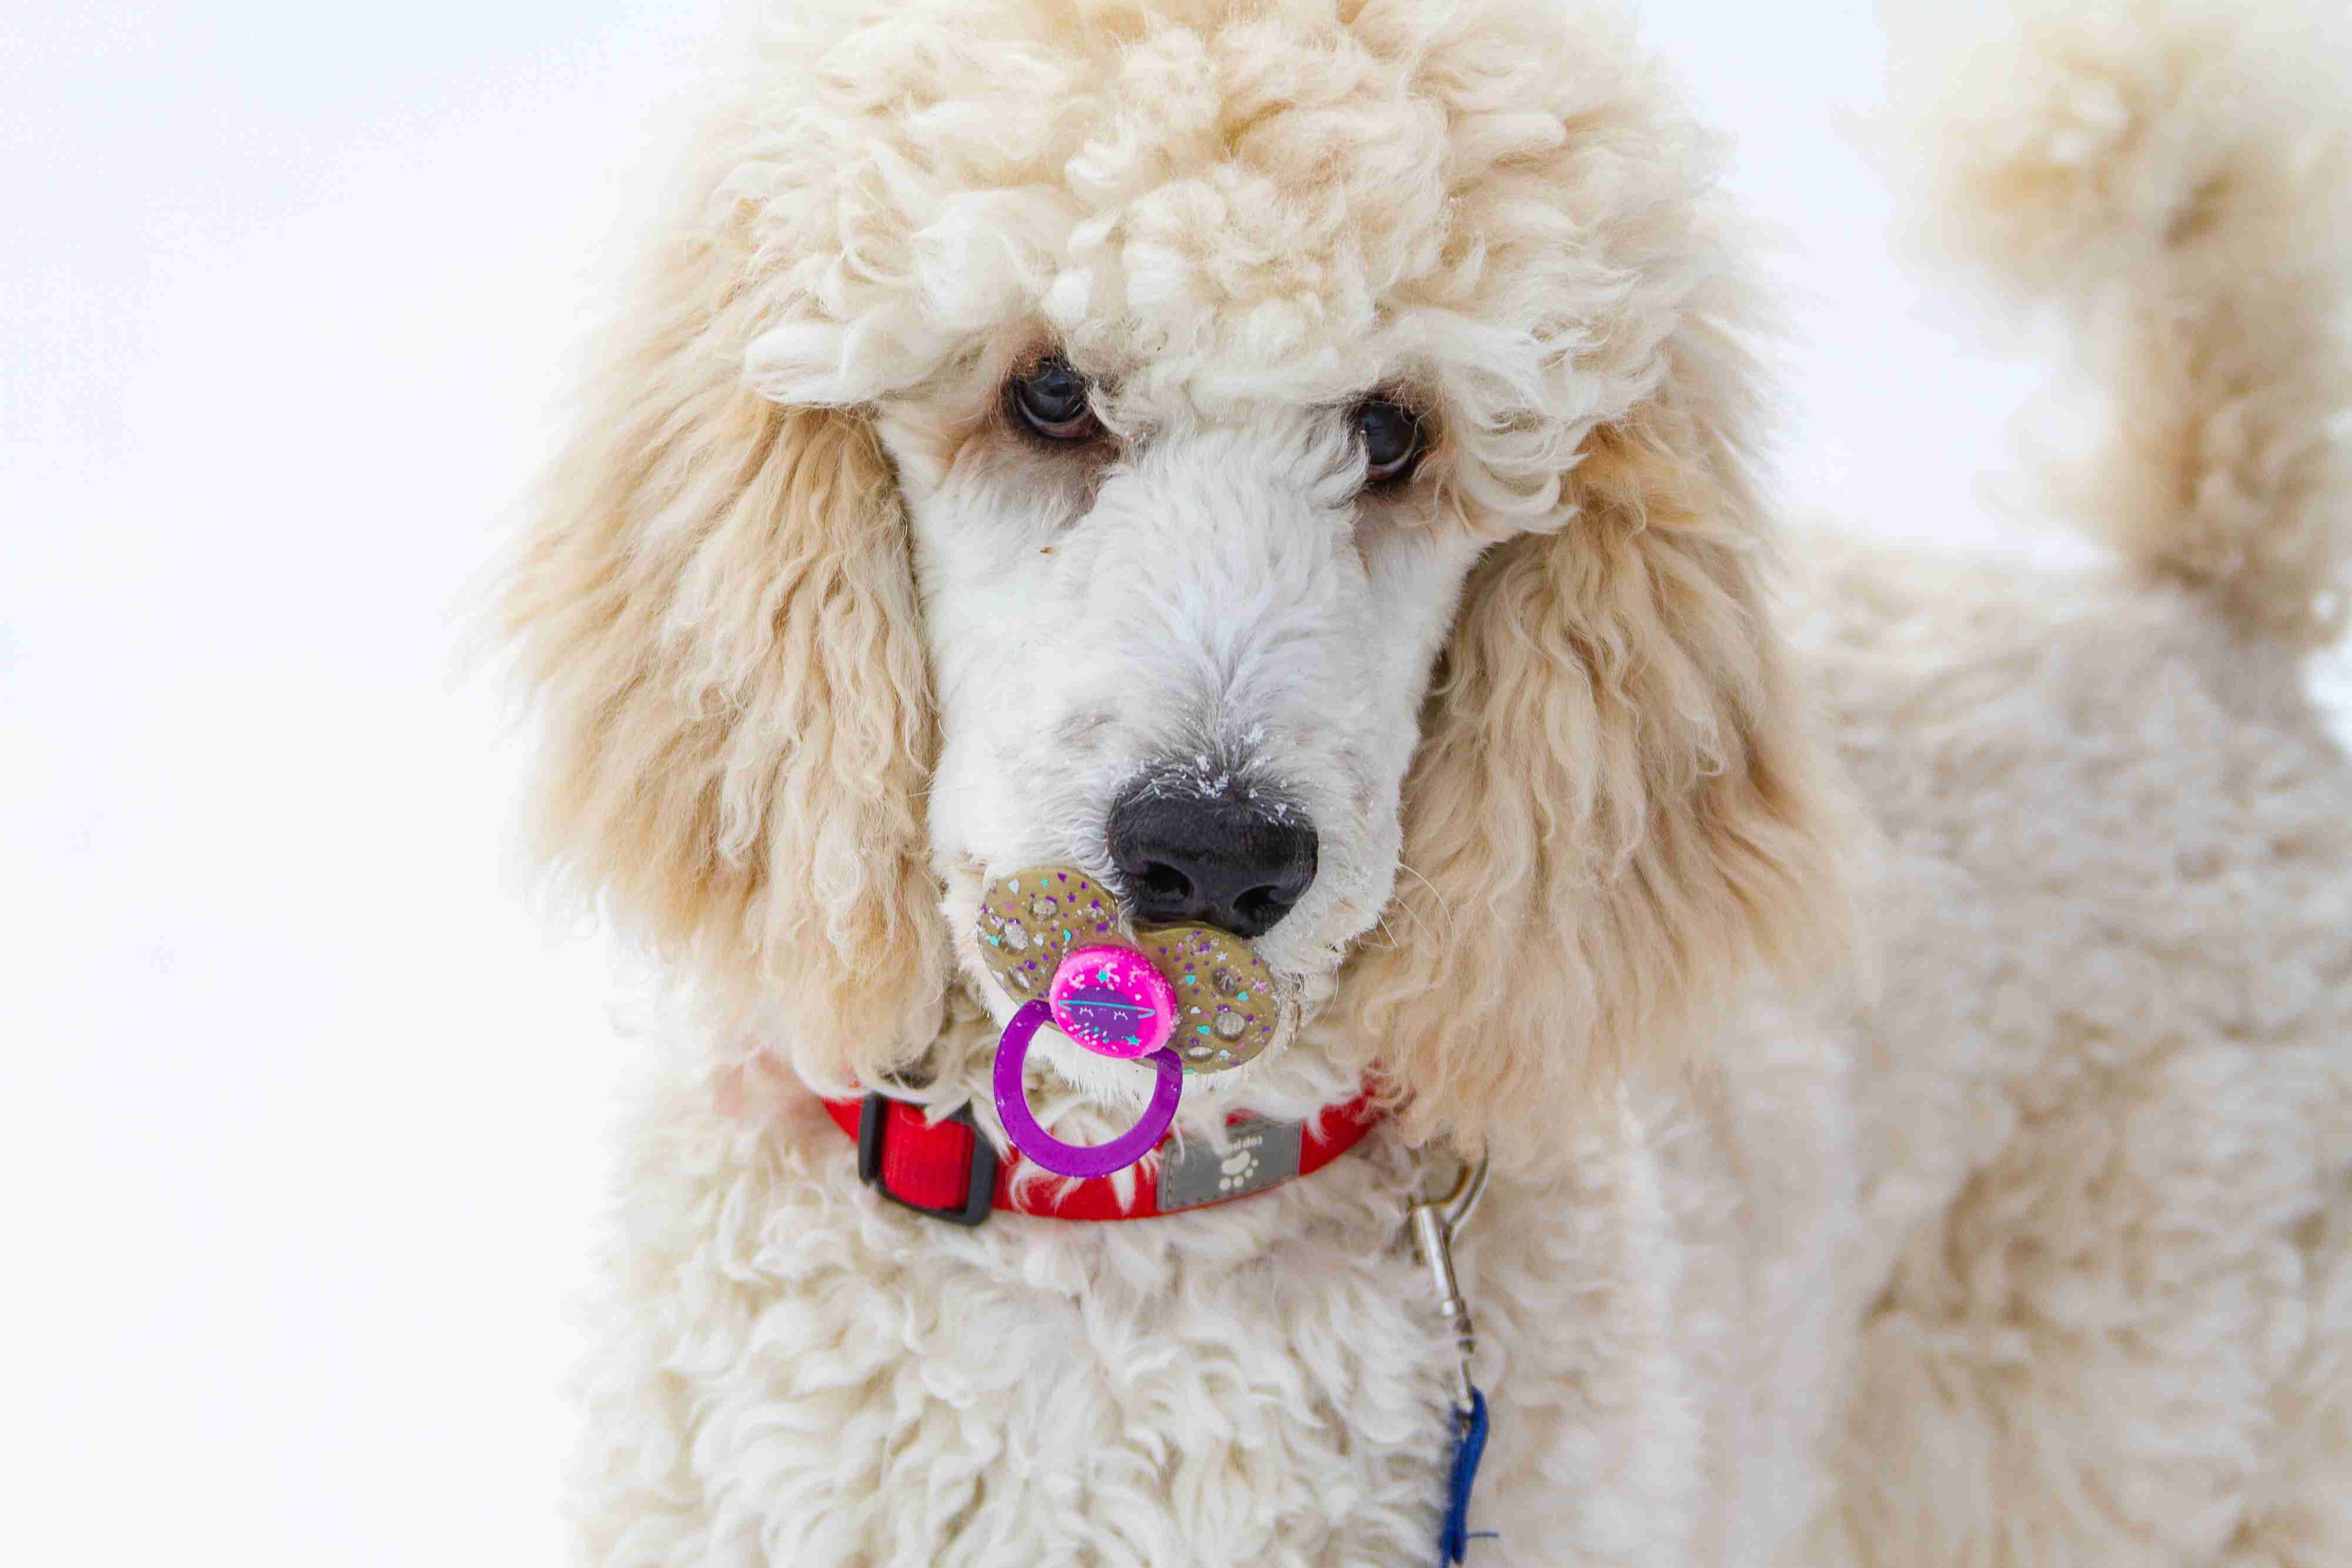 Do Poodles commonly suffer from joint problems such as arthritis? How can these issues be managed?